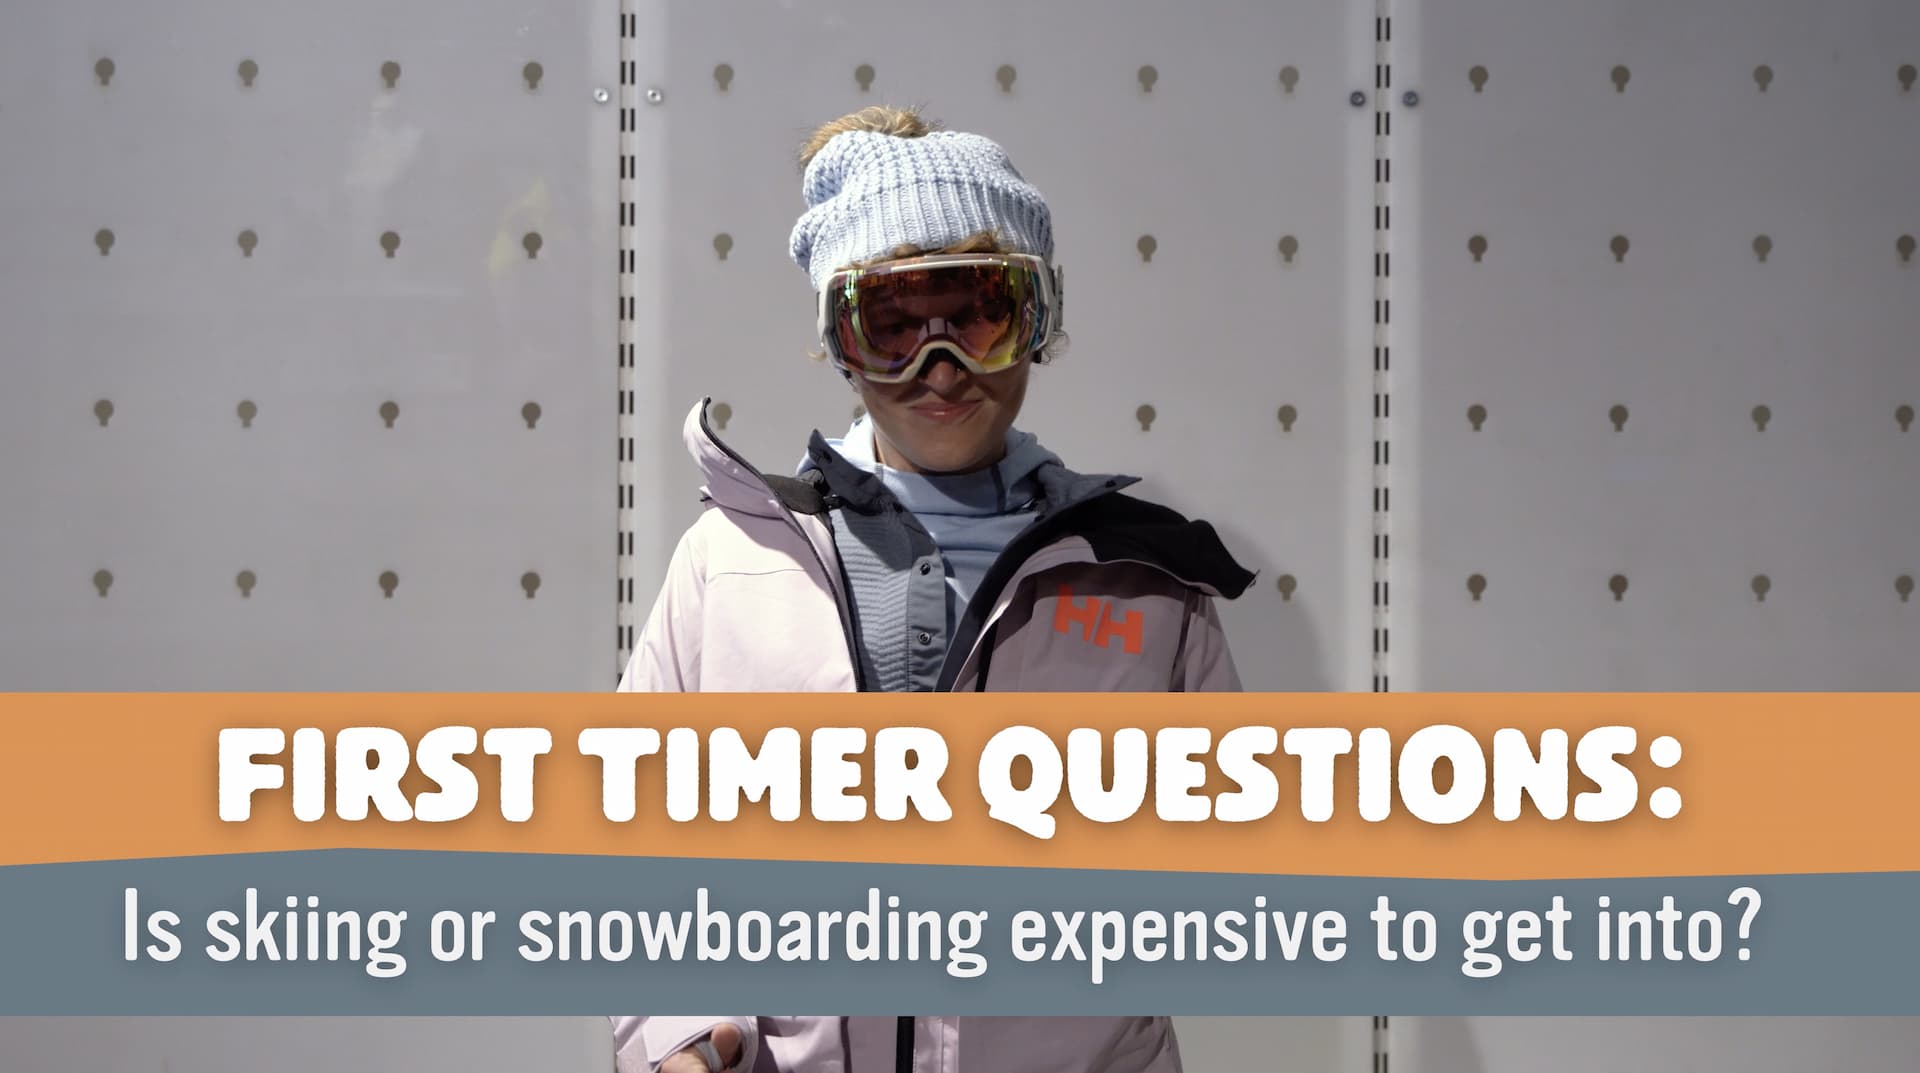 Featured Image for “First Timer Questions: Is Skiing or Snowboarding Expensive?”